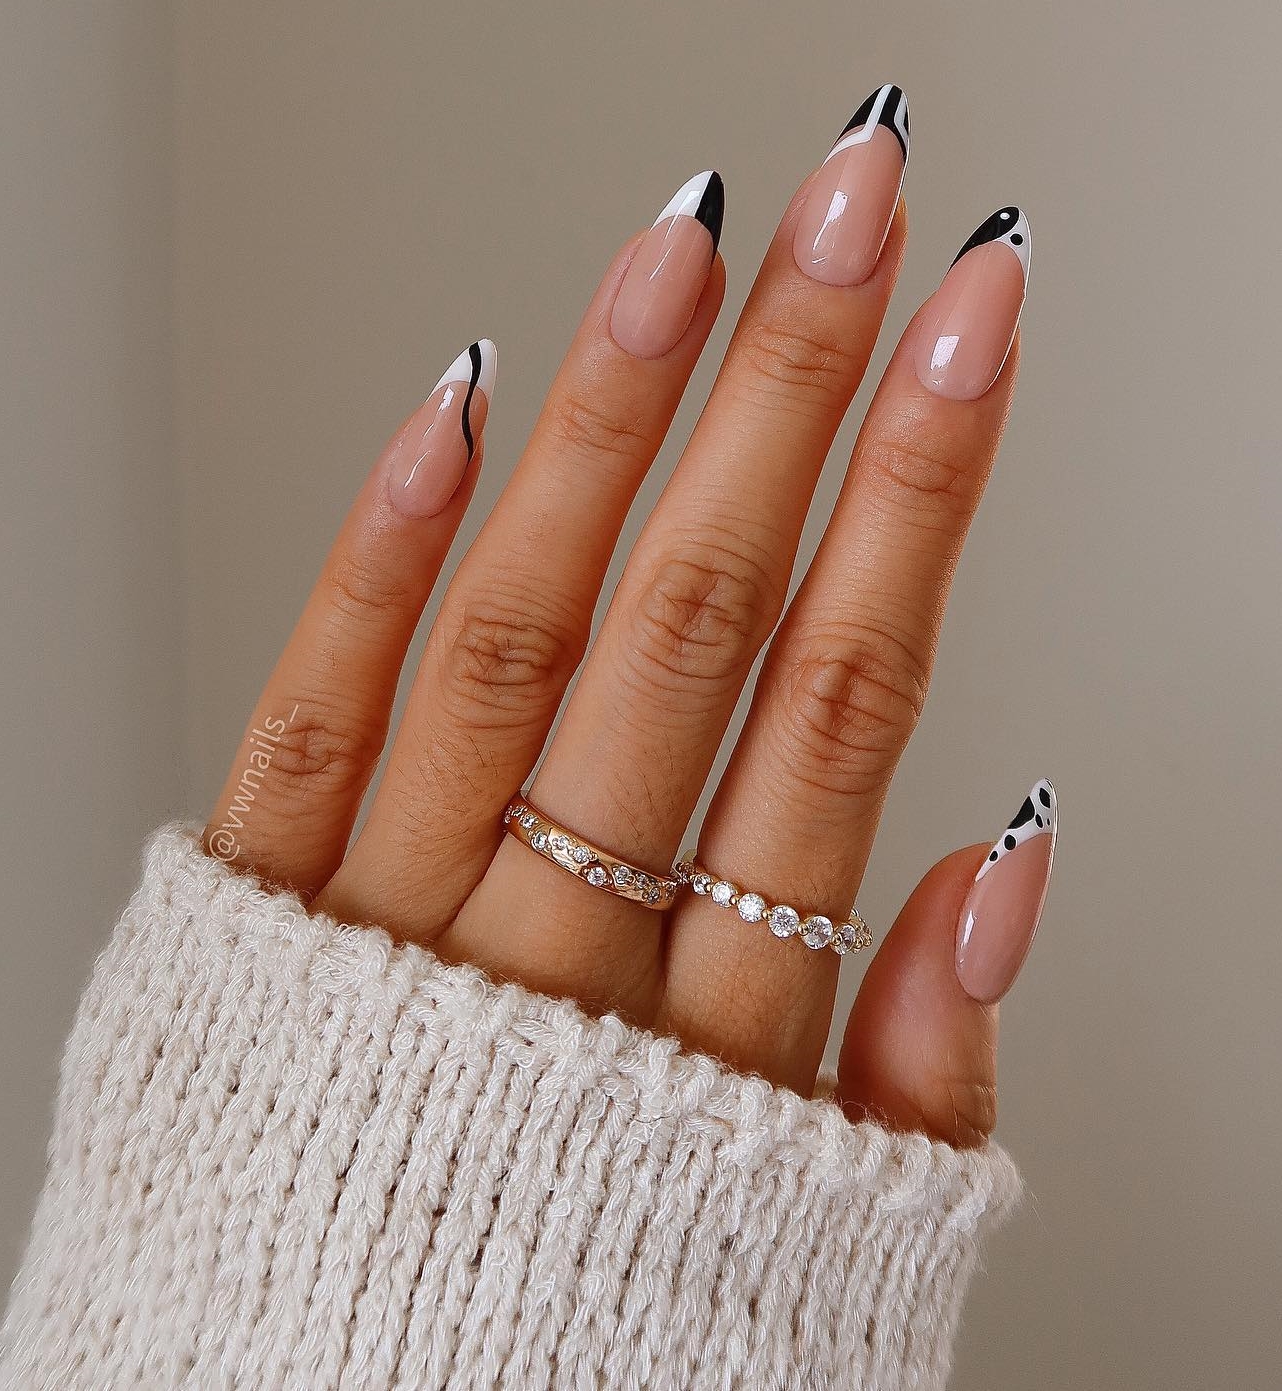 Abstract and Geometric French Nails